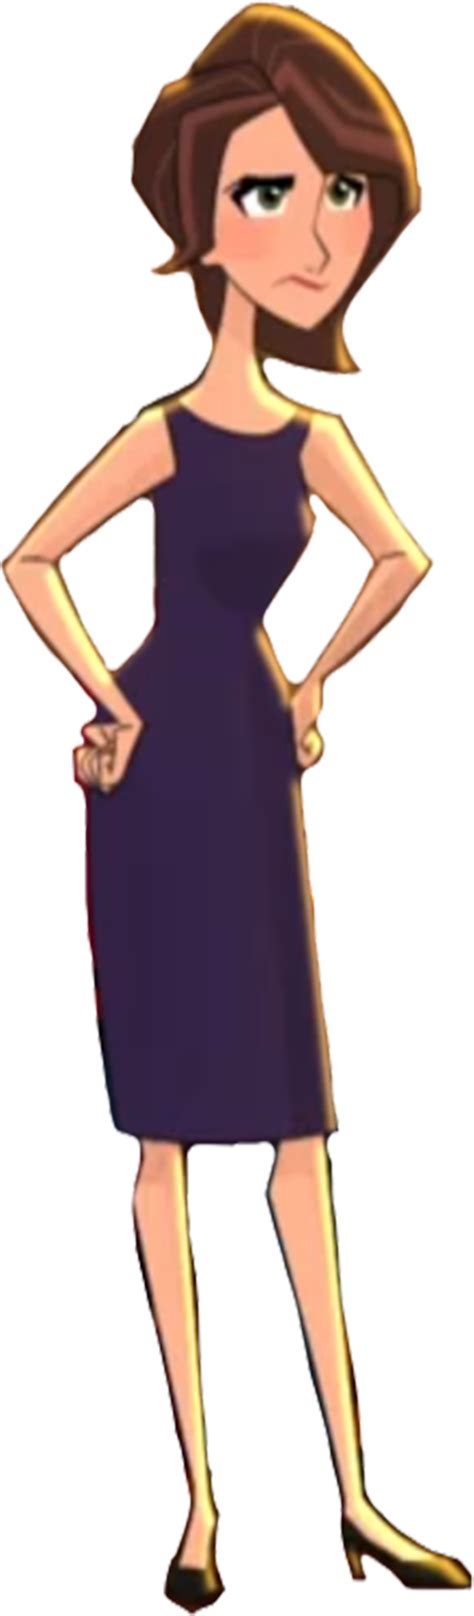 Aunt Cass Bh6 The Series In Her Dress Vector 3 By Homersimpson1983 On